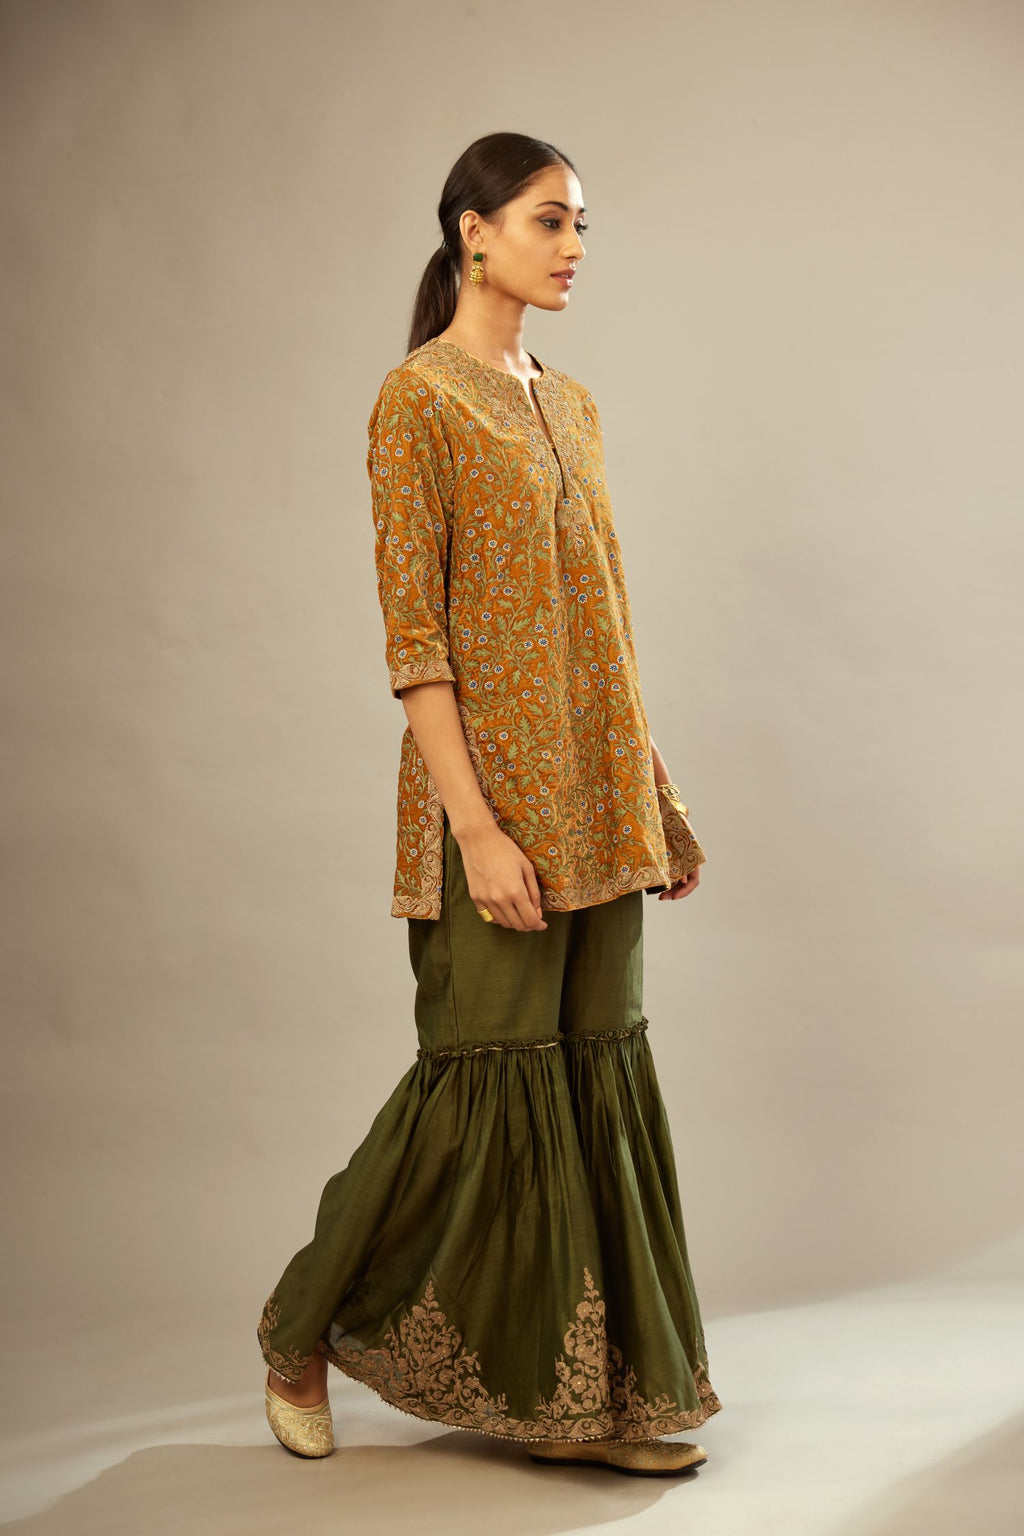 Mustard yellow silk velvet short kurta set with all-over silk thread jaal embroidery, detailed with gold dori embroidery.